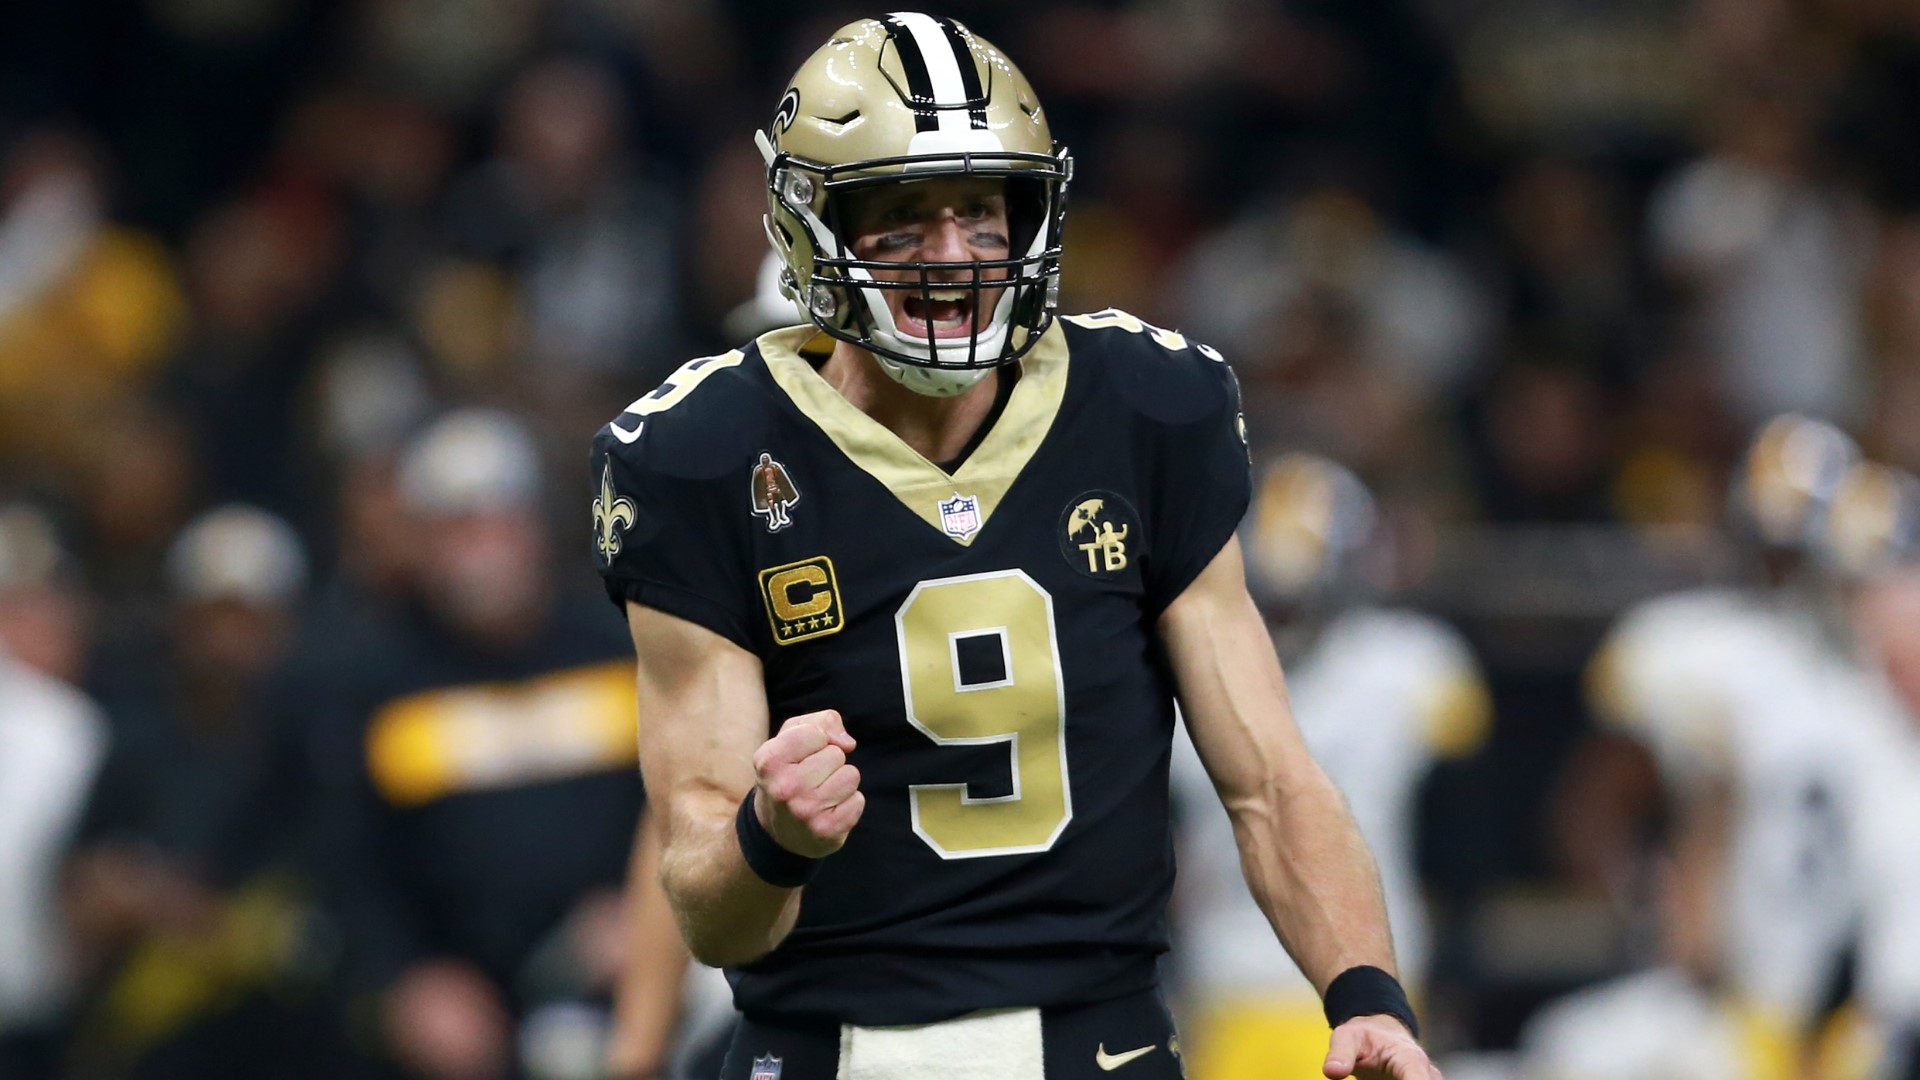 Whatever style an opponent wants to play, the 2018 Saints are more than capable of delivering a victory against them.